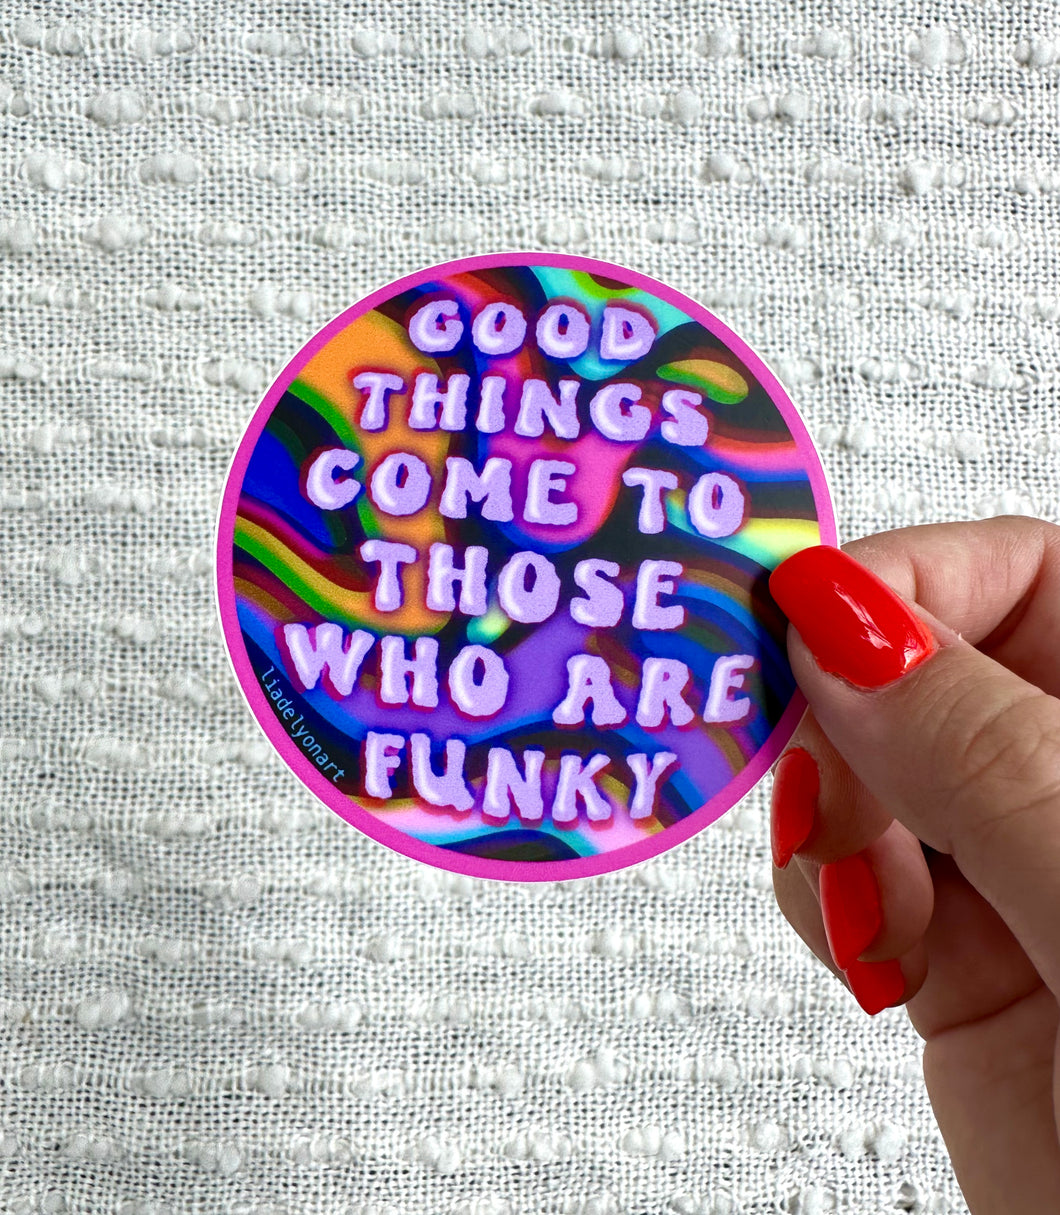 Good Things Come to Those Who Are Funky Vinyl Sticker, 3x3in.